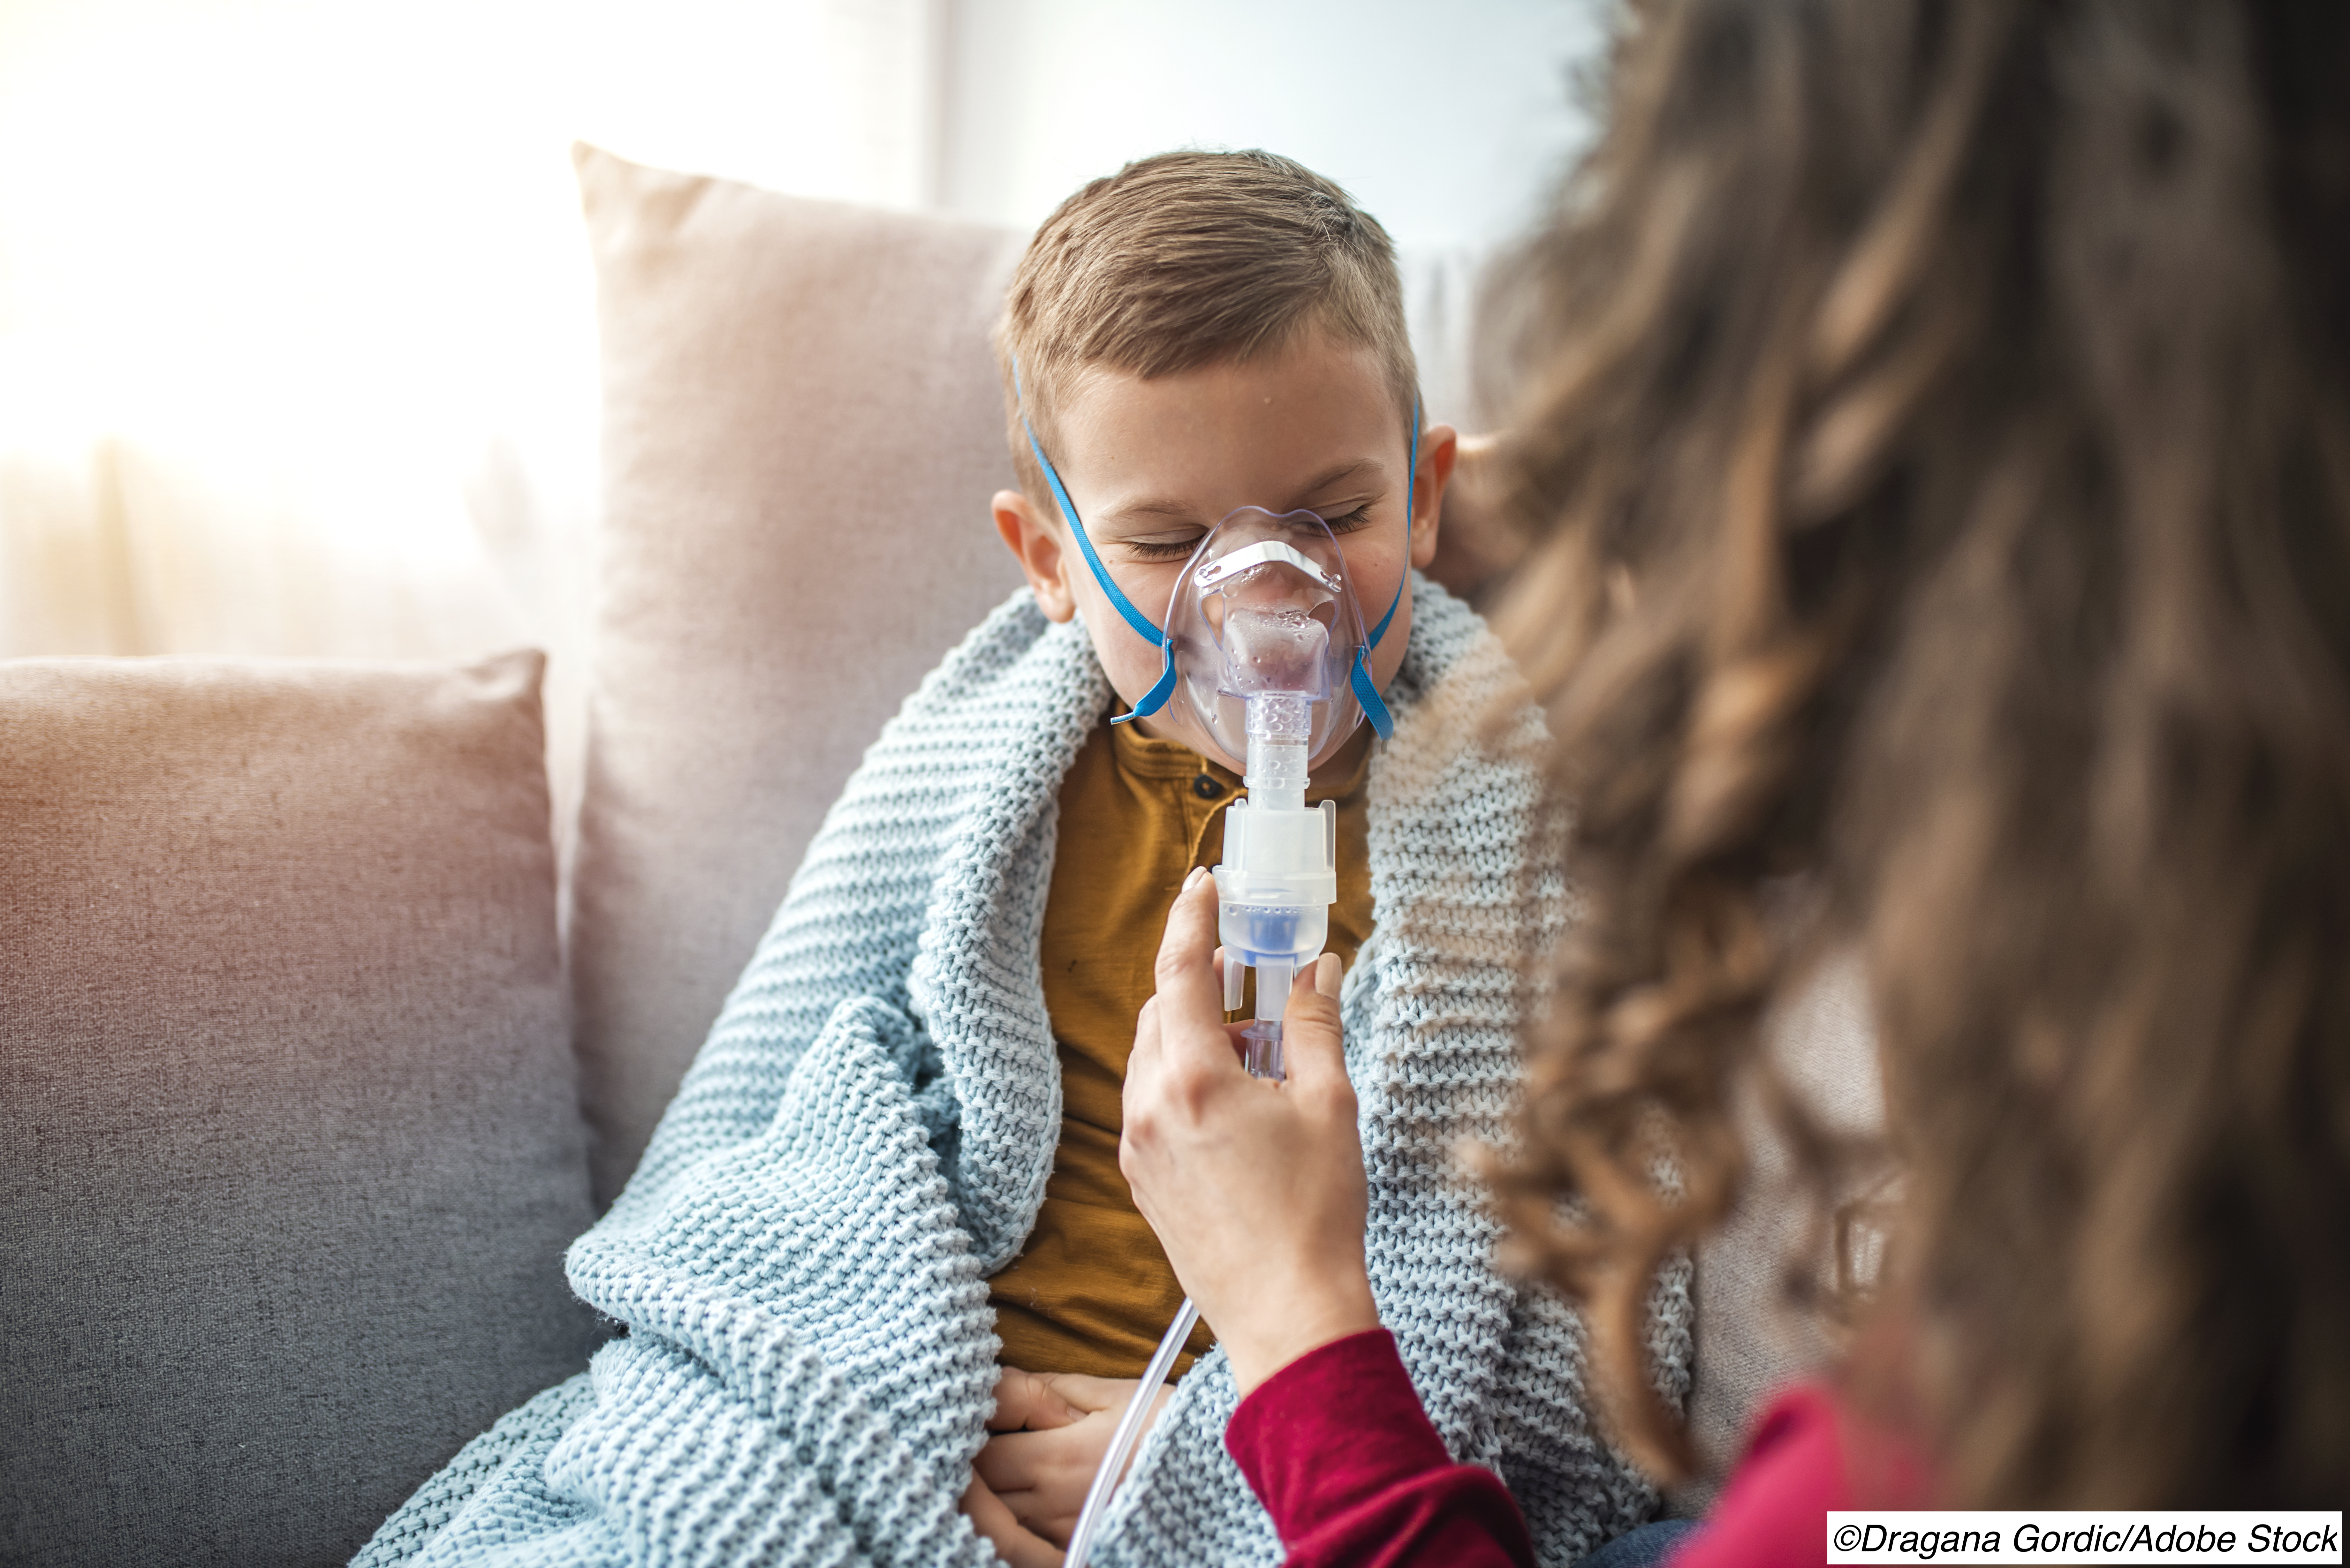 CHEST 2021: Dupilumab Safe, Effective in Very Young Asthma Patients